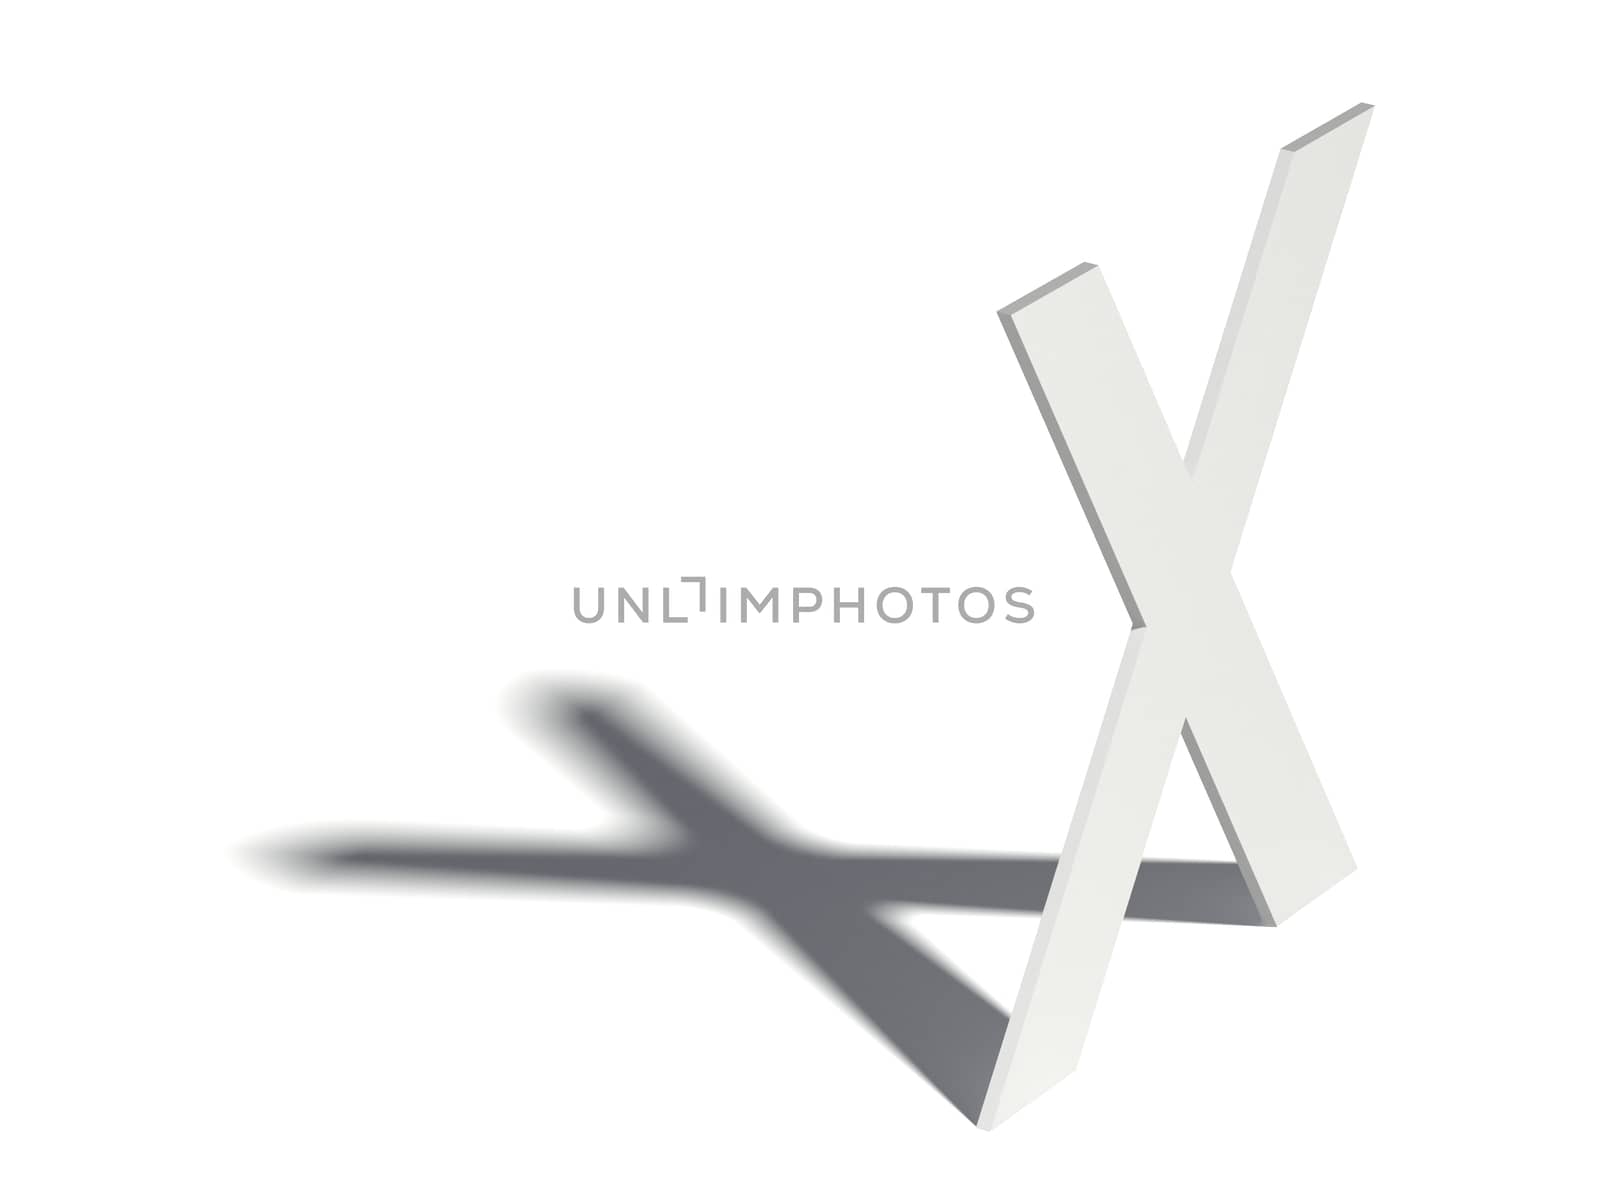 Drop shadow font. Letter X. 3D render illustration isolated on white background